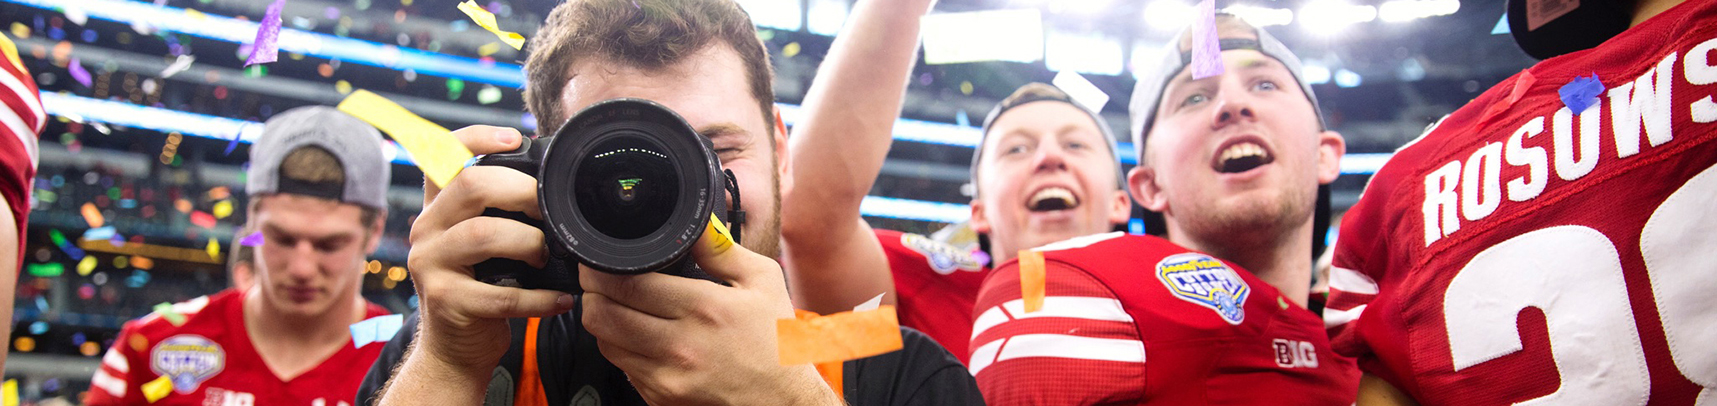 image of a camera man taking pictures at a football game